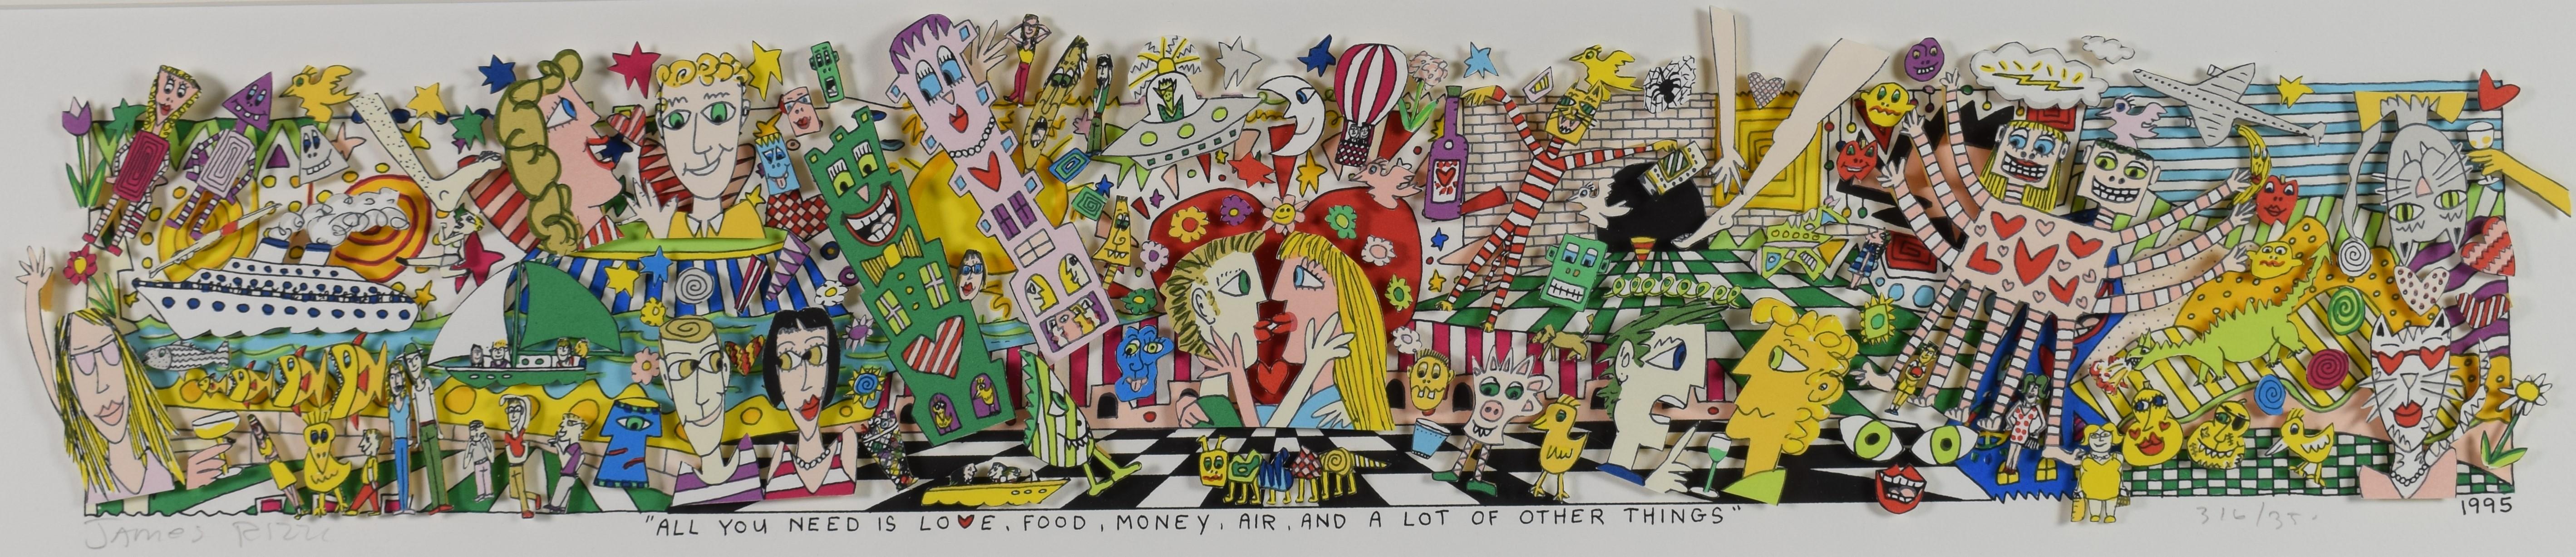 All you need is love, food, money, air, and a lot of other things - Pop Art- 3D - Mixed Media Art by James Rizzi